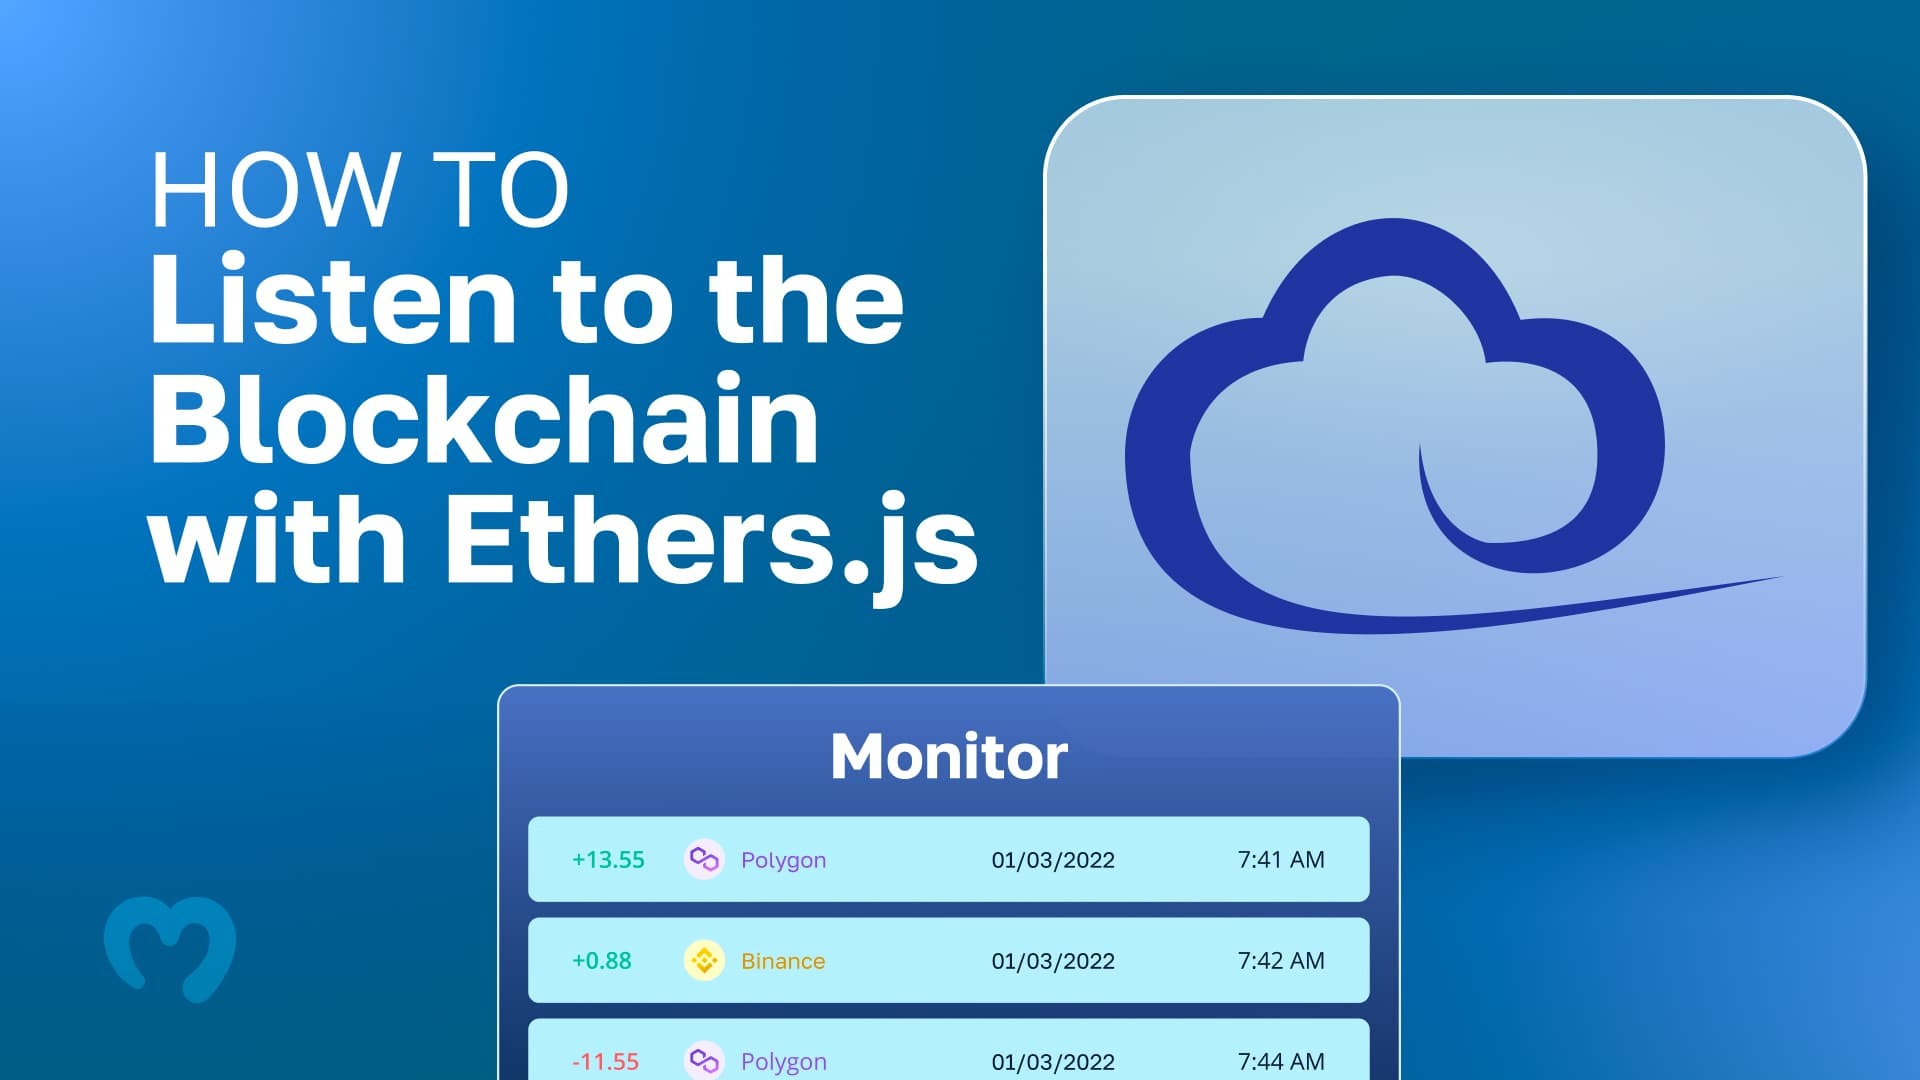 Exploring how to listen to the blockchain with ethers.js